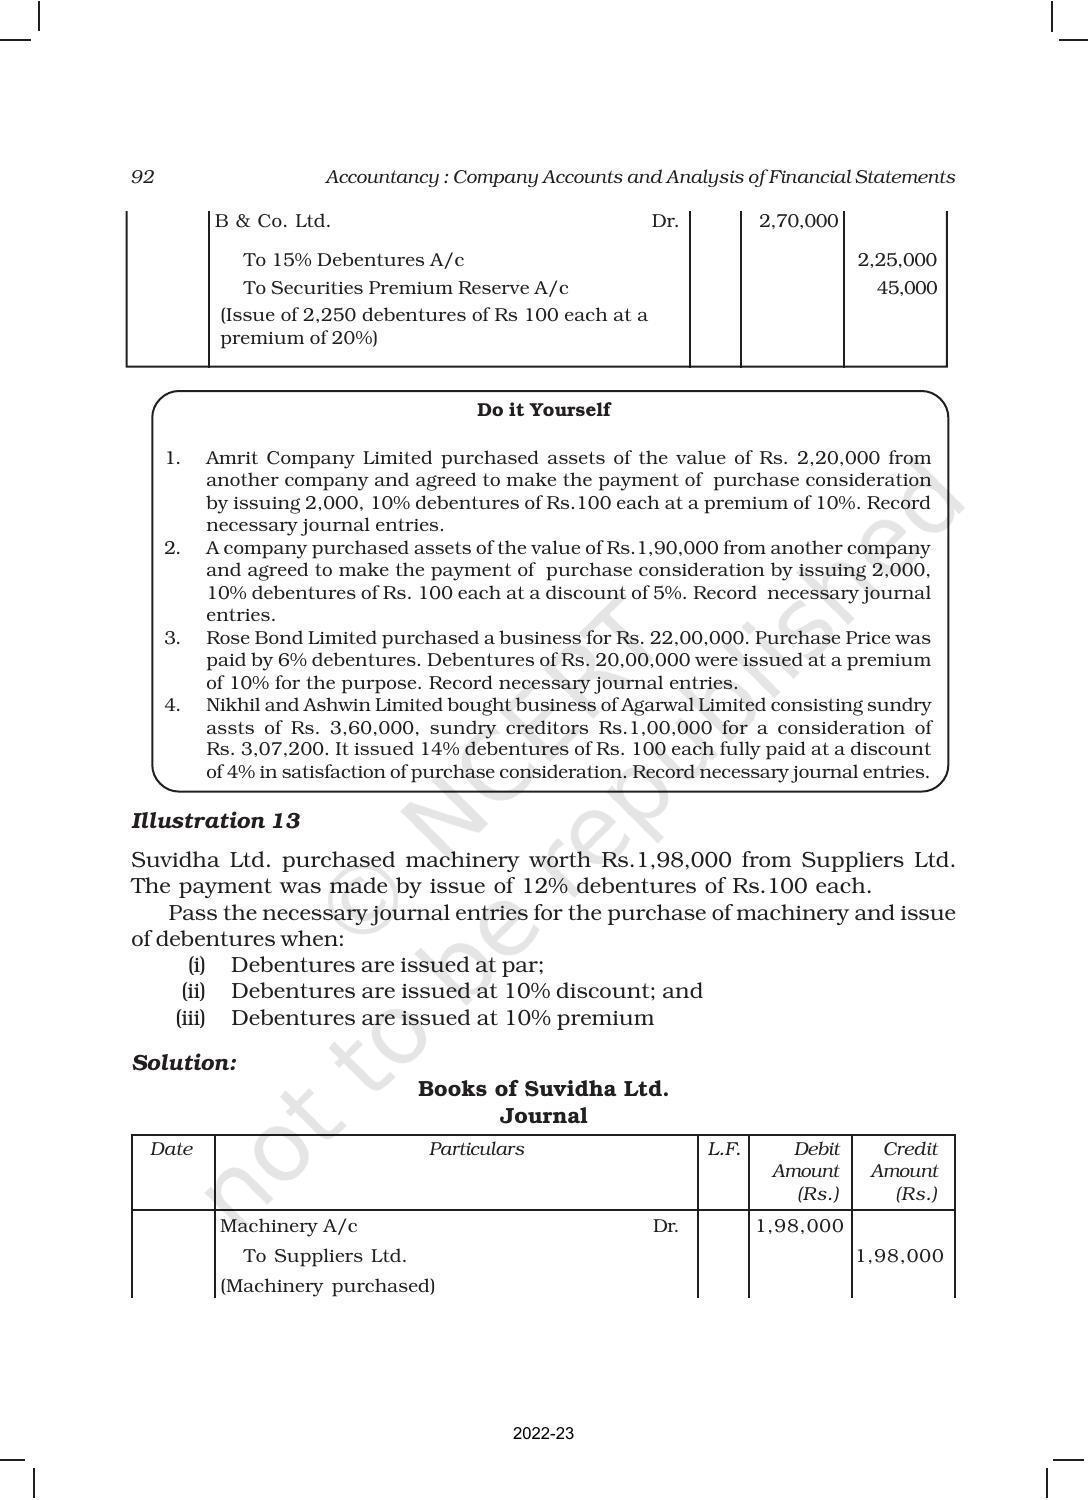 NCERT Book for Class 12 Accountancy Part II Chapter 1 Issue and Redemption of Debentures - Page 18